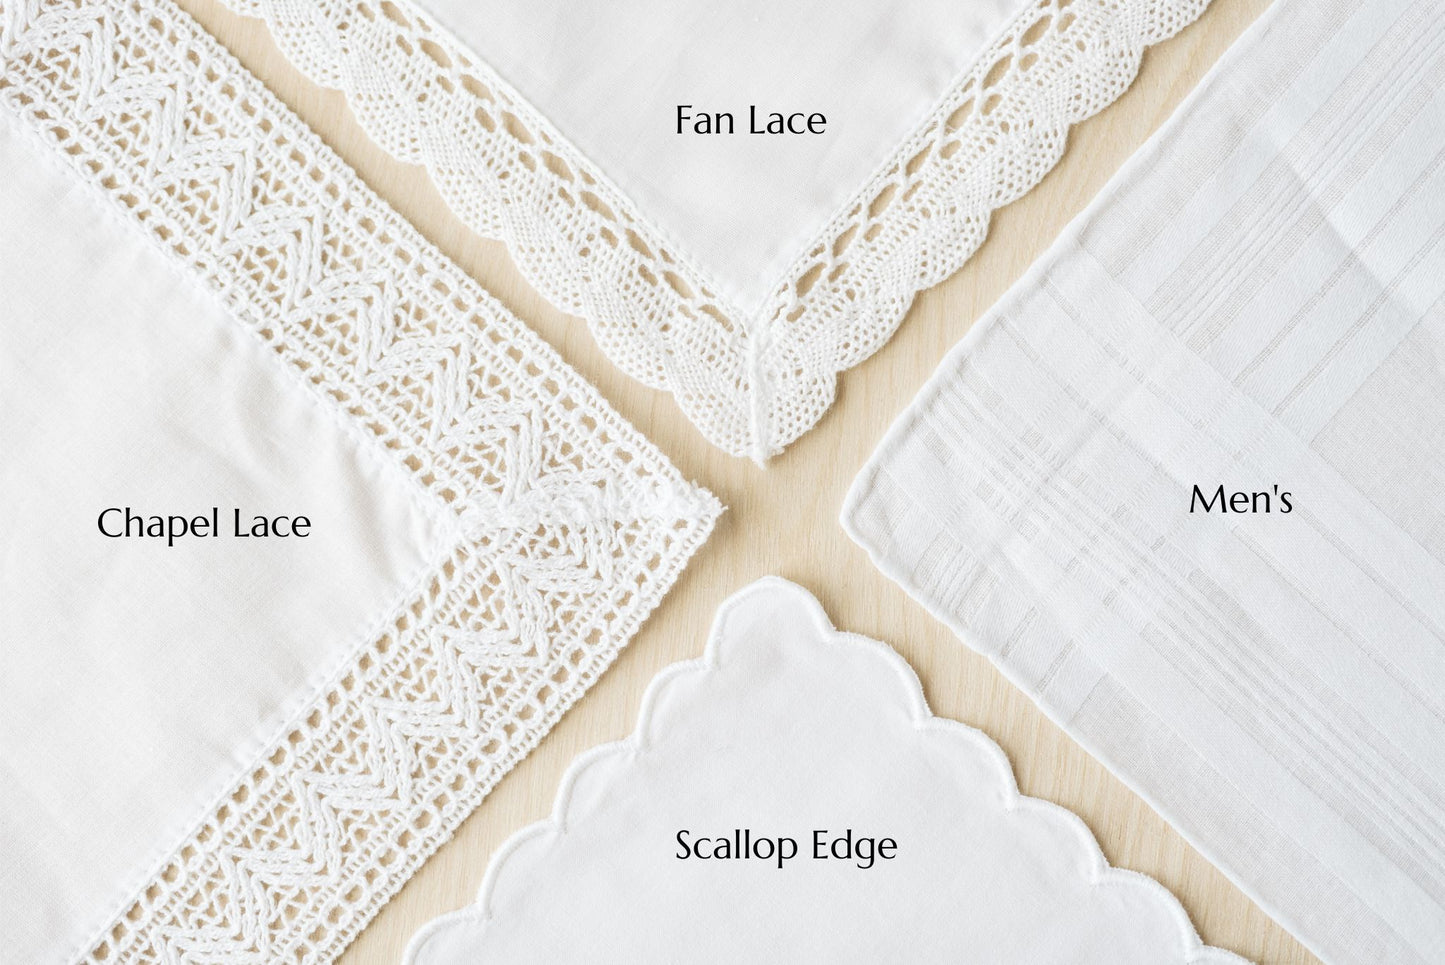 Turn Your Handwriting Into An Embroidered Handkerchief